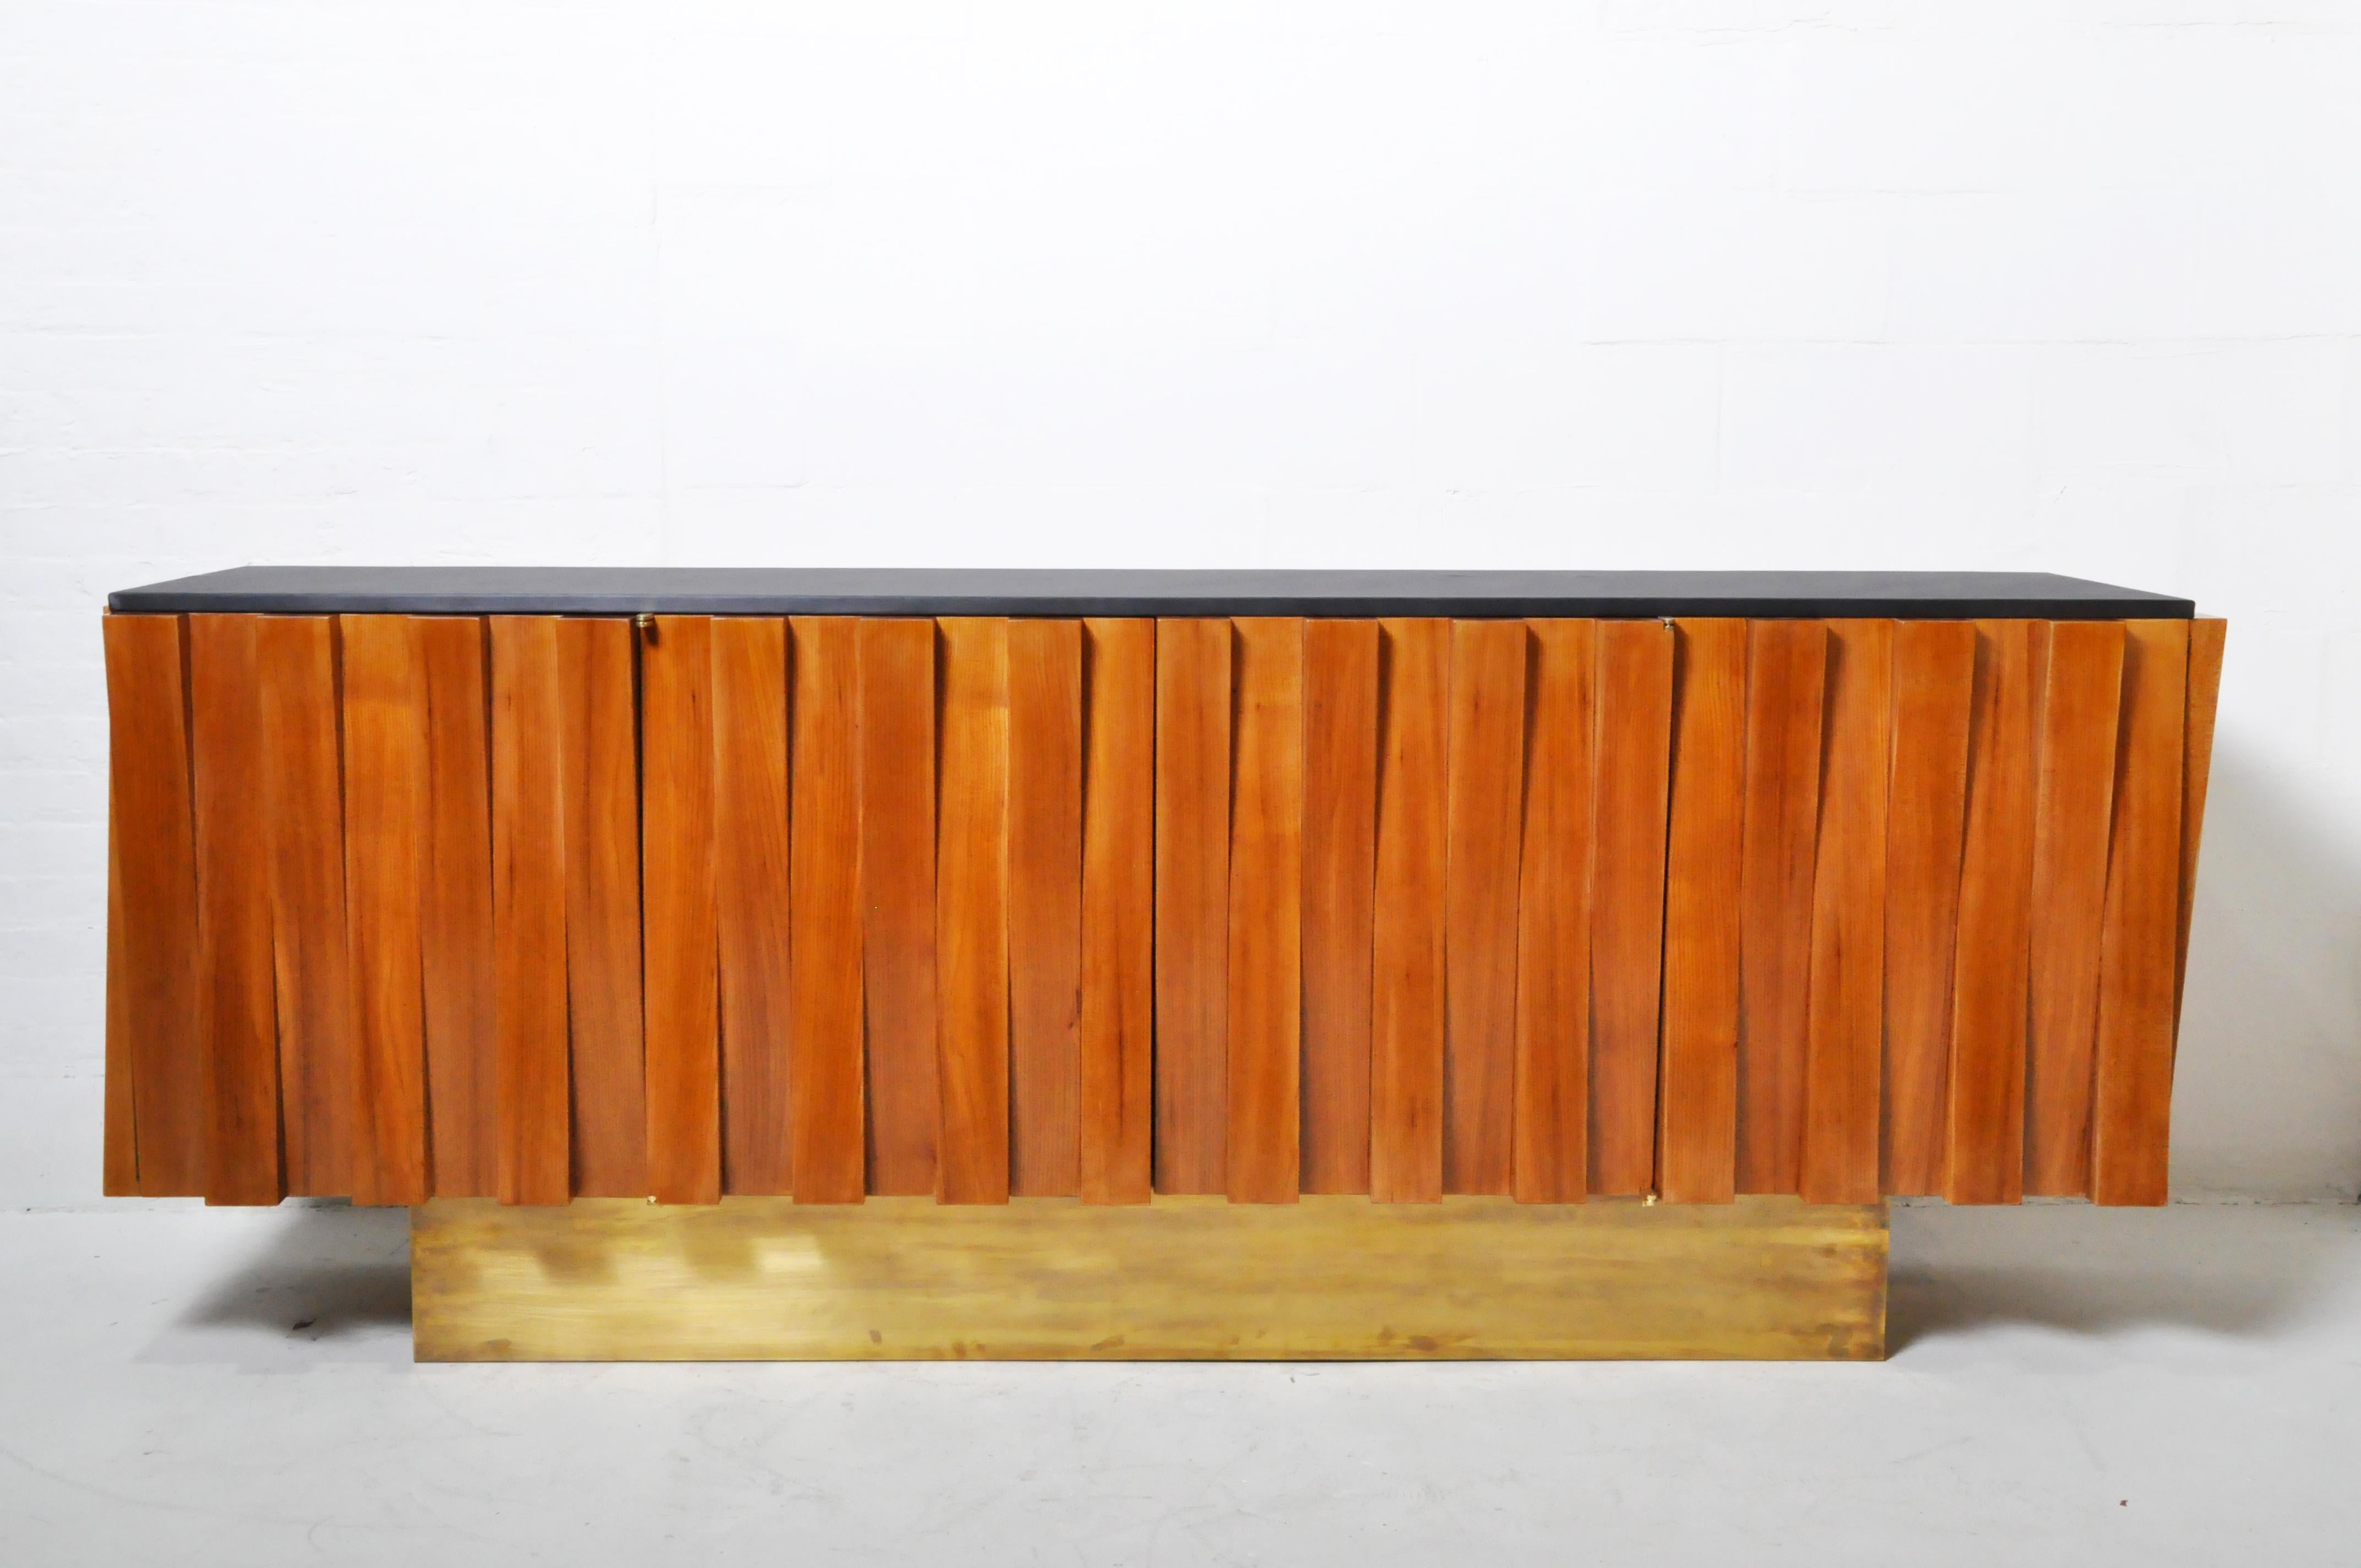 This impressive Mid-Century Modern (or Brutalist sideboard) is made from straight-grained light walnut veneers applied to alternating raised dentils. The four doors feature brass scissor hinges and are without metal handles. The interior, also